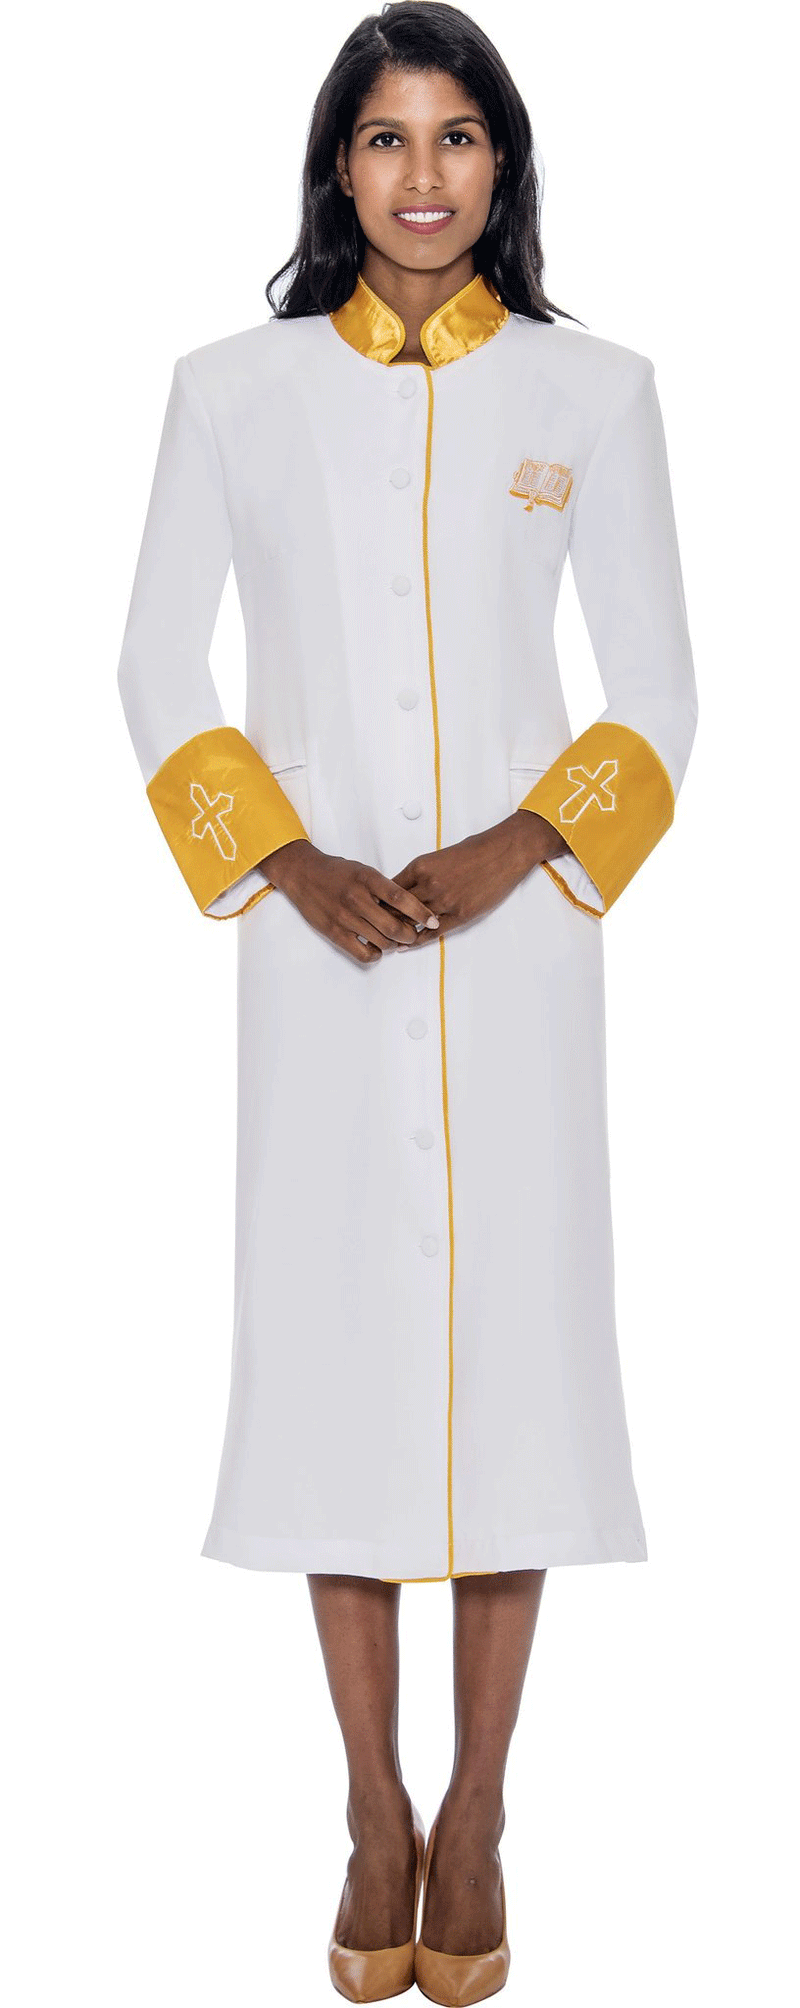 Women Cassock Robe RR9001-White/Gold - Church Suits For Less